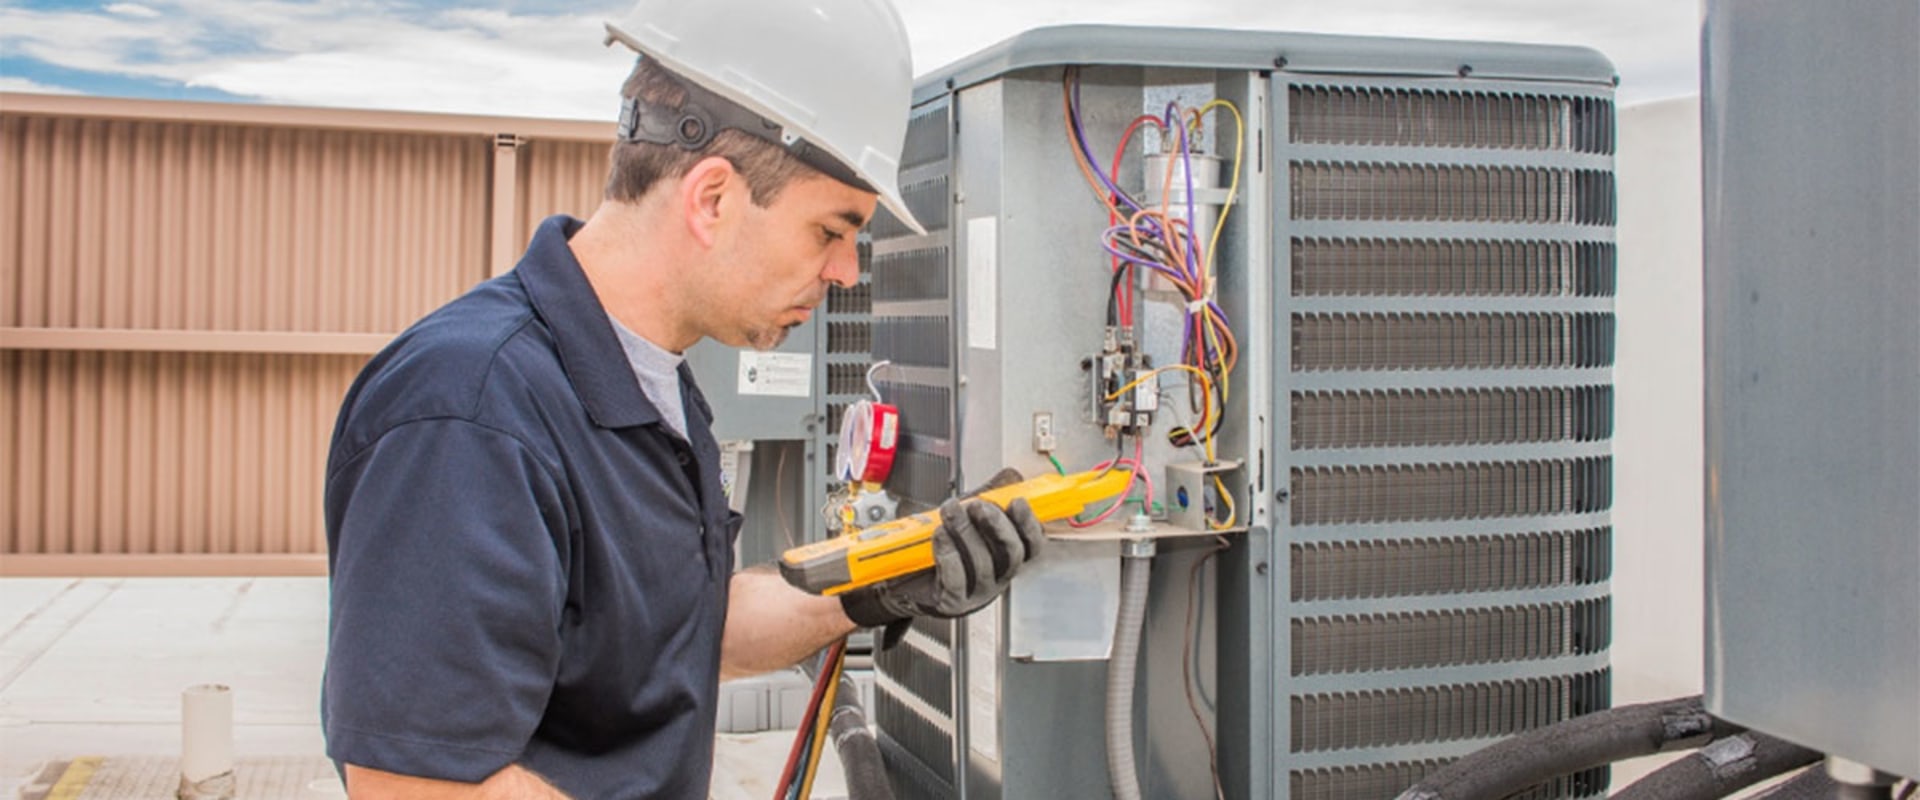 How often to service the HVAC unit?